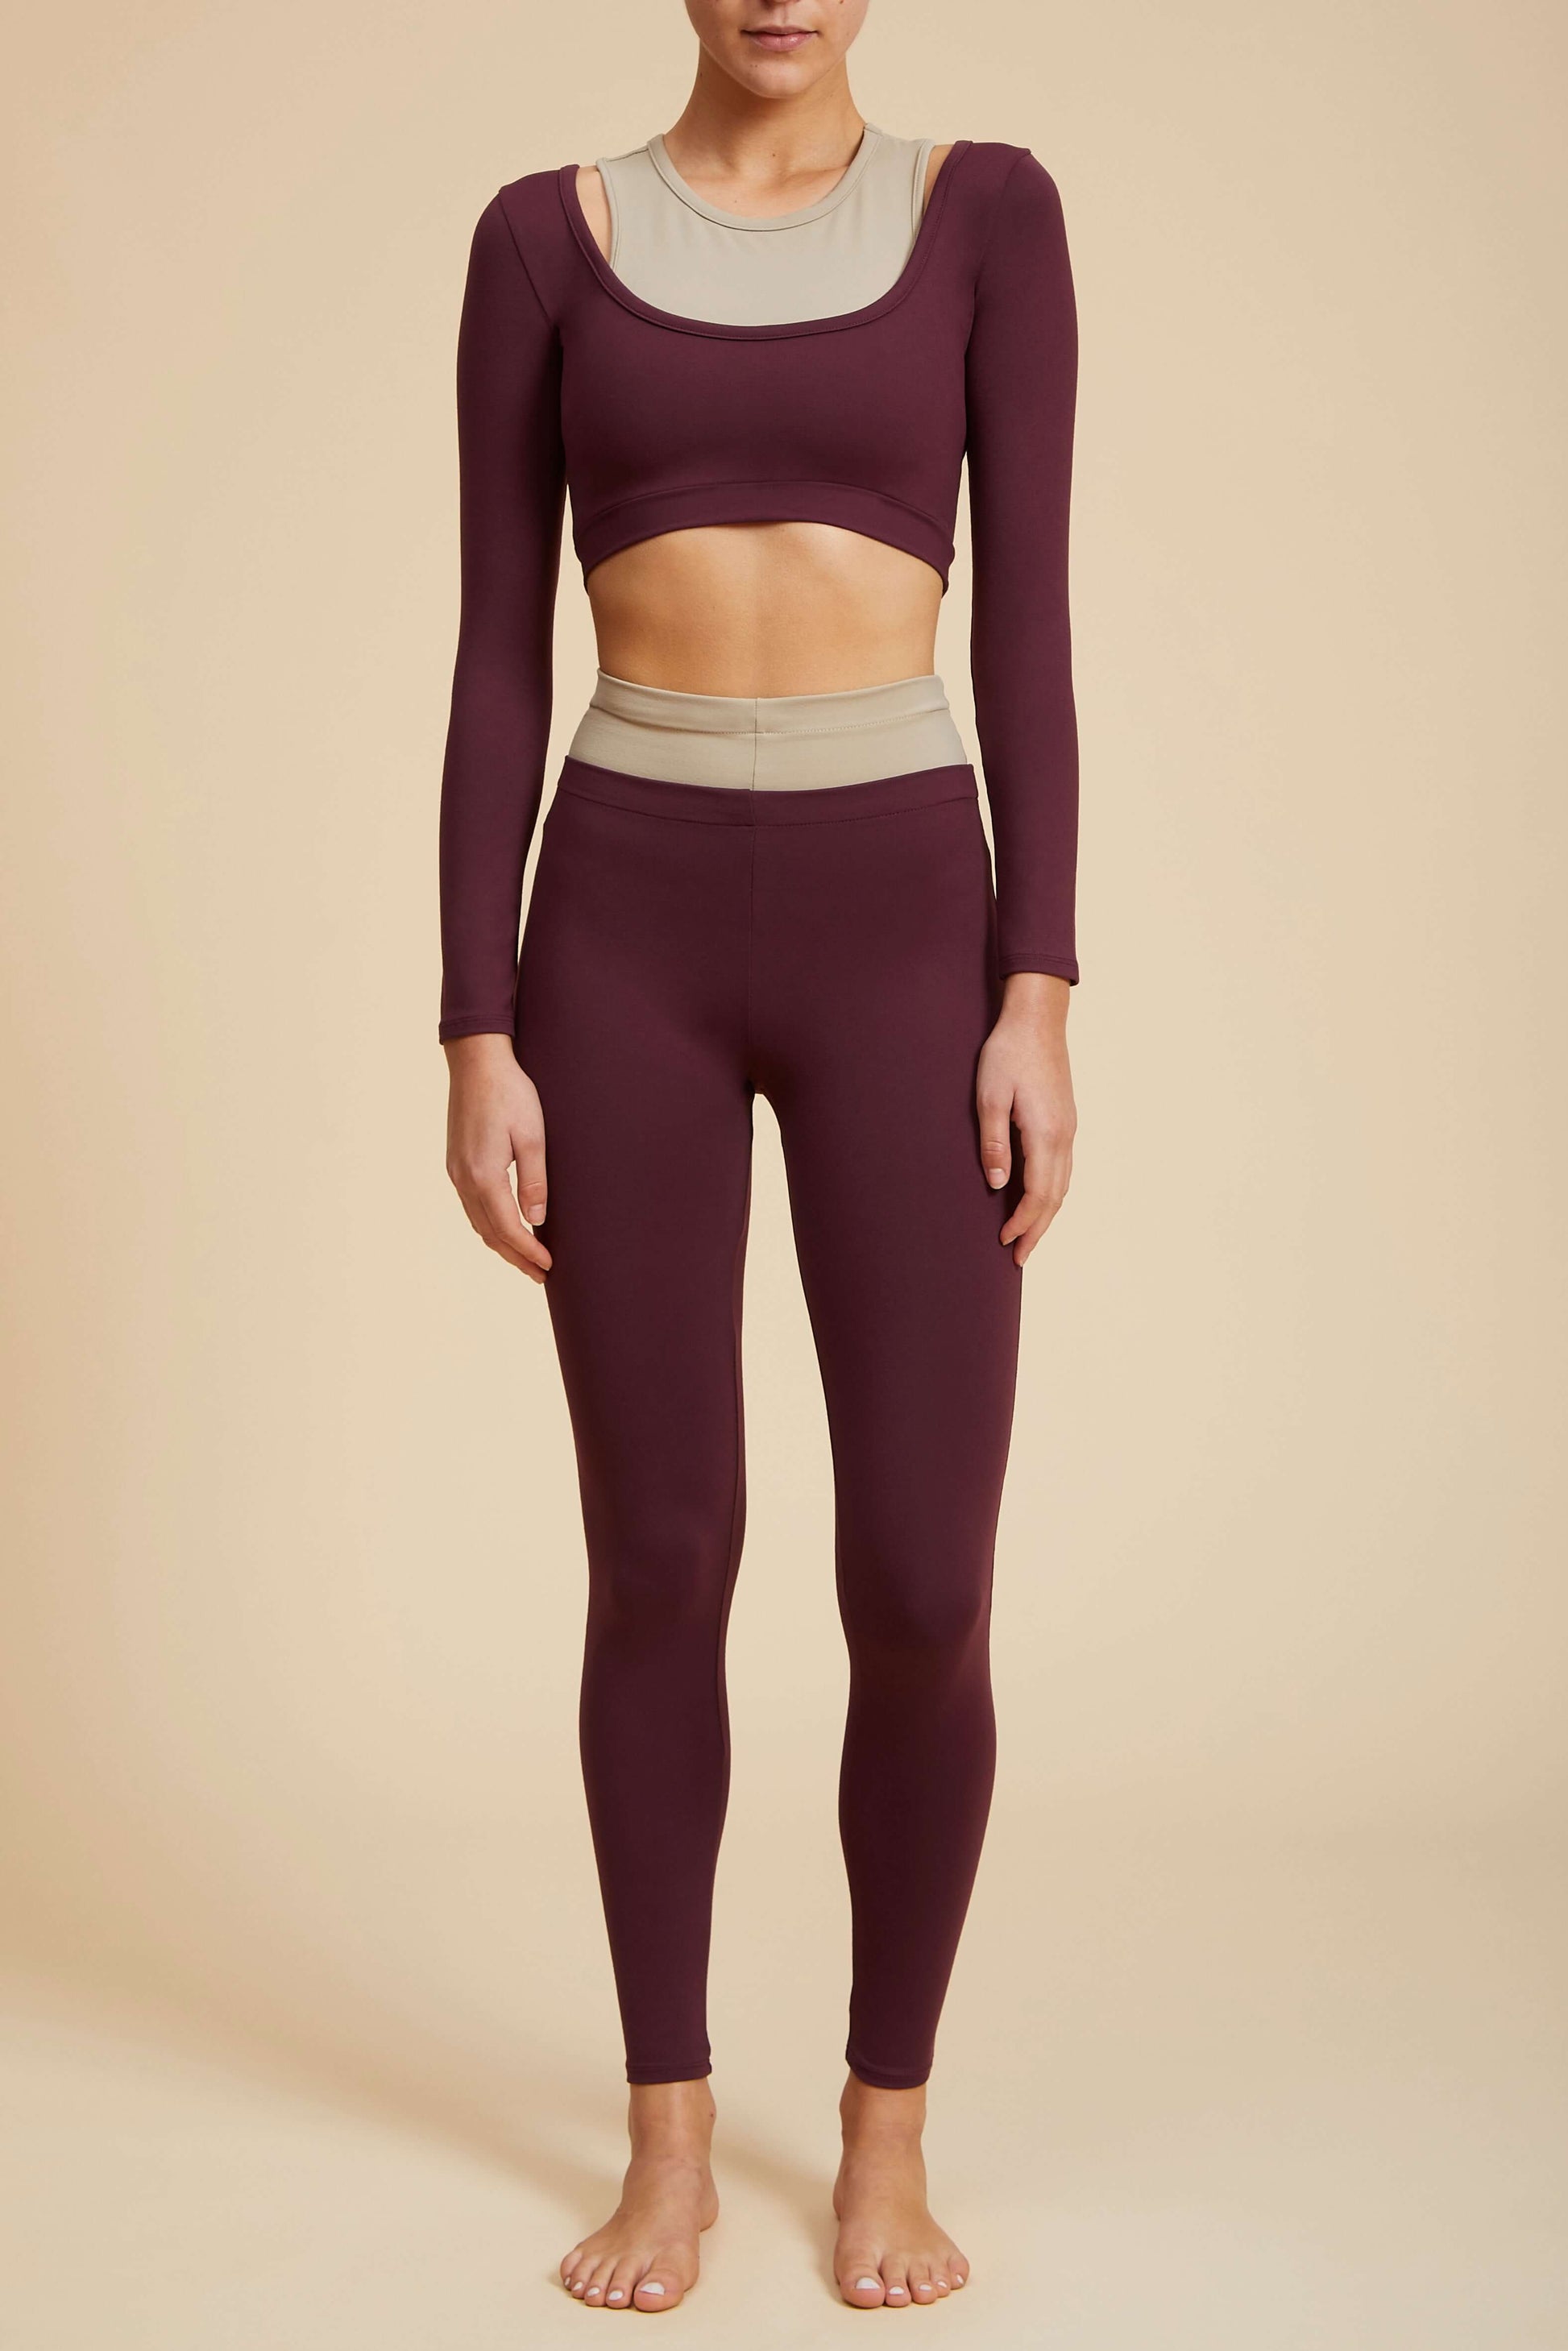 Live The Process Taurus Long Sleeve. March to the beat of your own drum in our sportswear-inspired Taurus Long Sleeve—a striking 2-in-1 in contrasting colors that doesn’t skimp on form or function. This fitted bra top features a wide scoop neck, a cropped